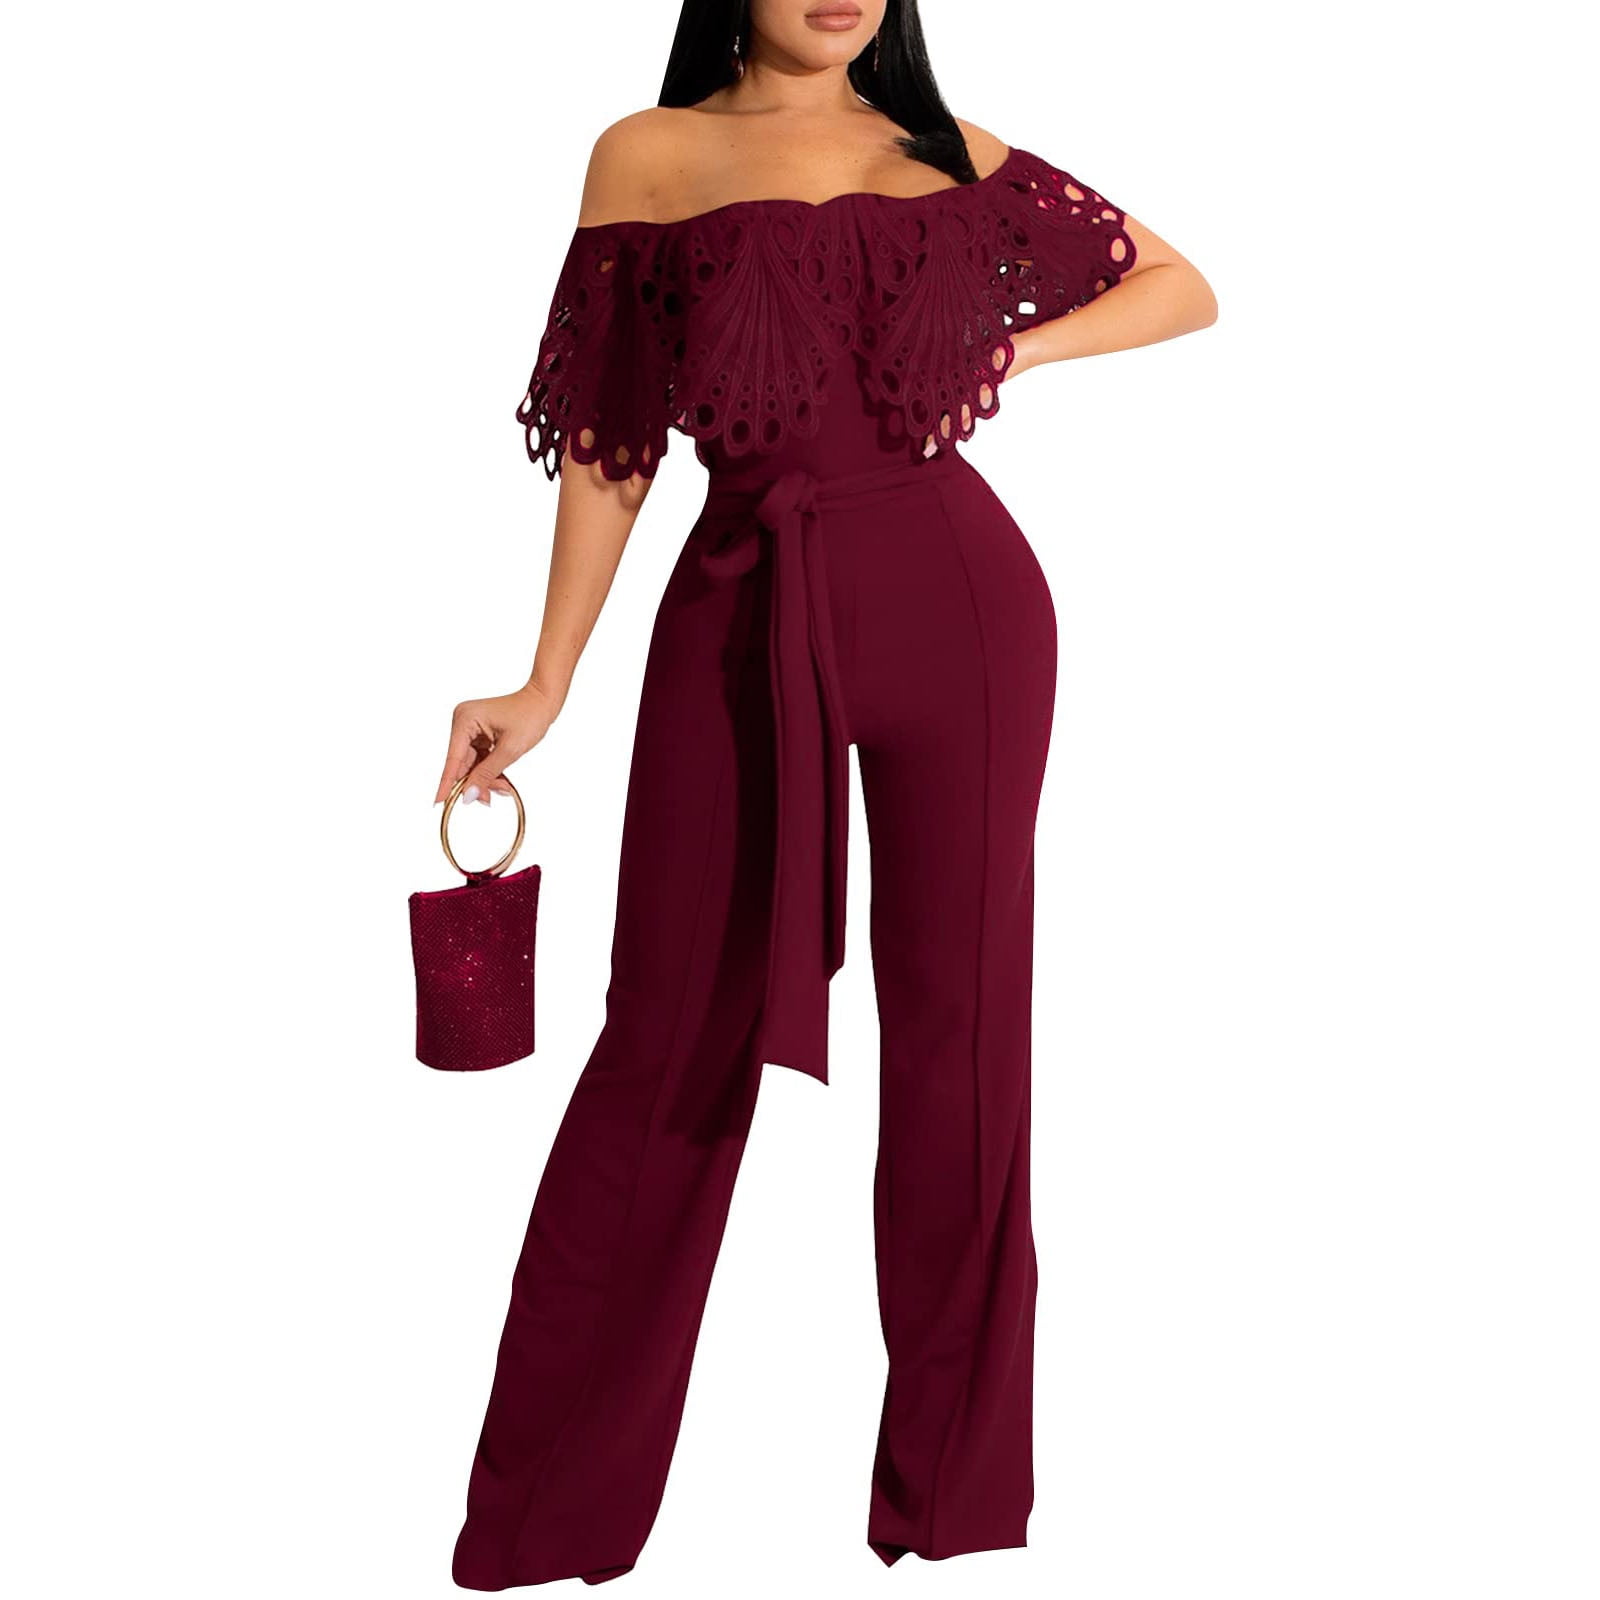 Gaecuw Jumpsuits for Women Dressy Short Sleeve Off the Shoulder Strapless  Overall Band Collar Solid Onesie Lace Strappy Hollow Cutout Ruffle Peplum